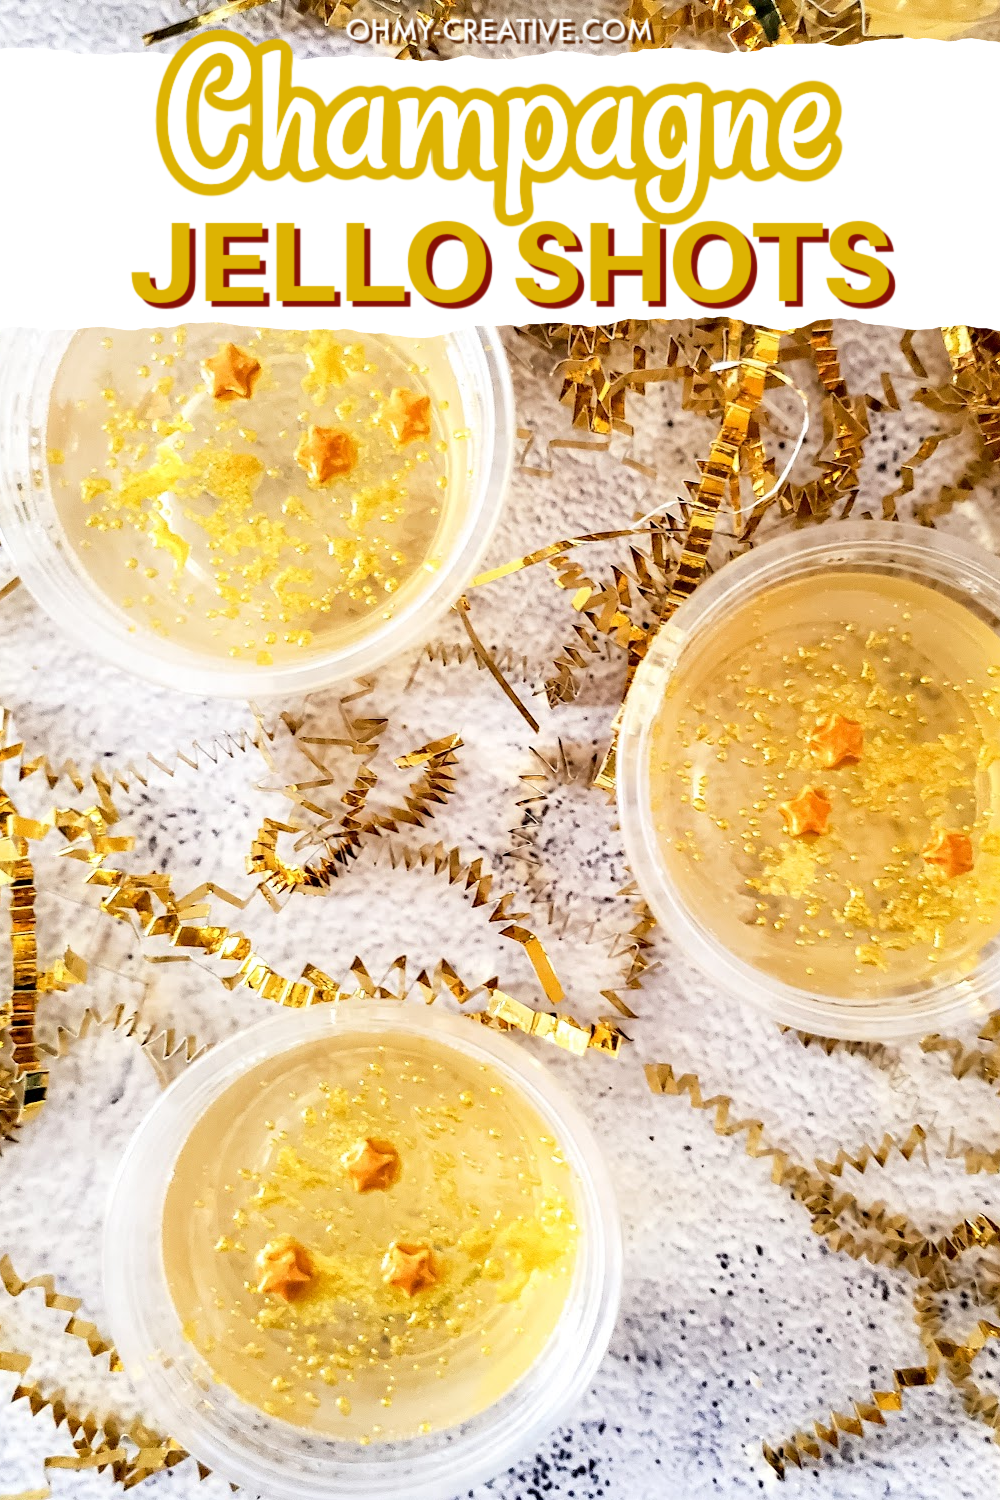 Bubbly, sparkly, and so much fun, champagne jello shots are perfect for all kinds of parties (especially New Year's Eve).